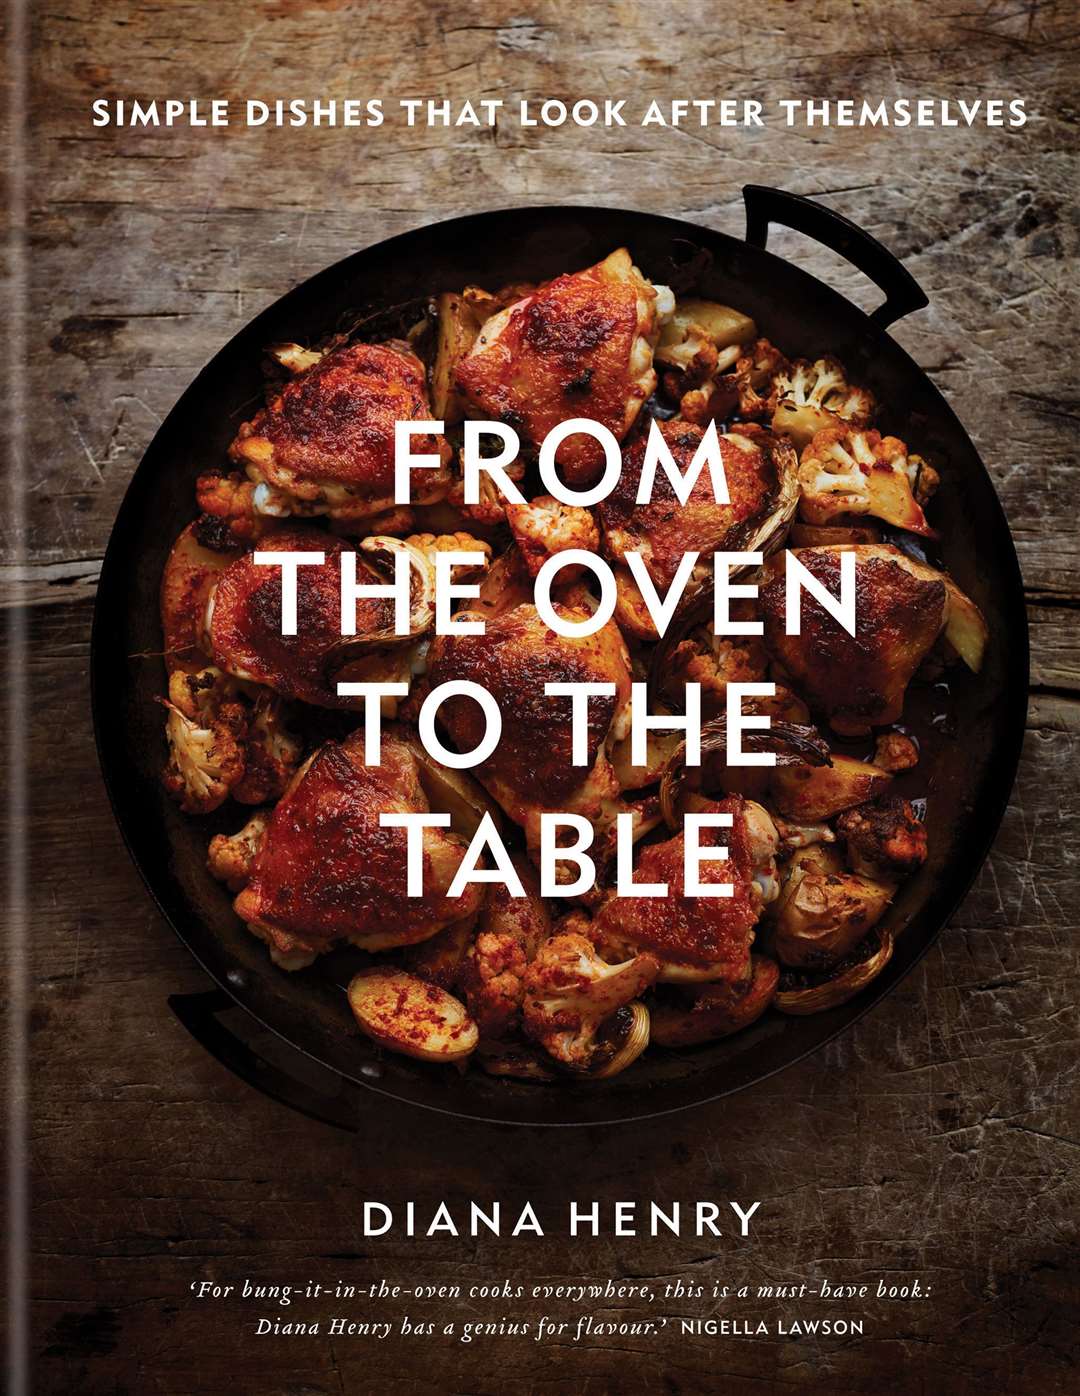 From the Oven to the Table: Simple dishes that look after themselves by Diana Henry. Published by Mitchell Beazley priced £25 (octopusbooks.co.uk). Available now.